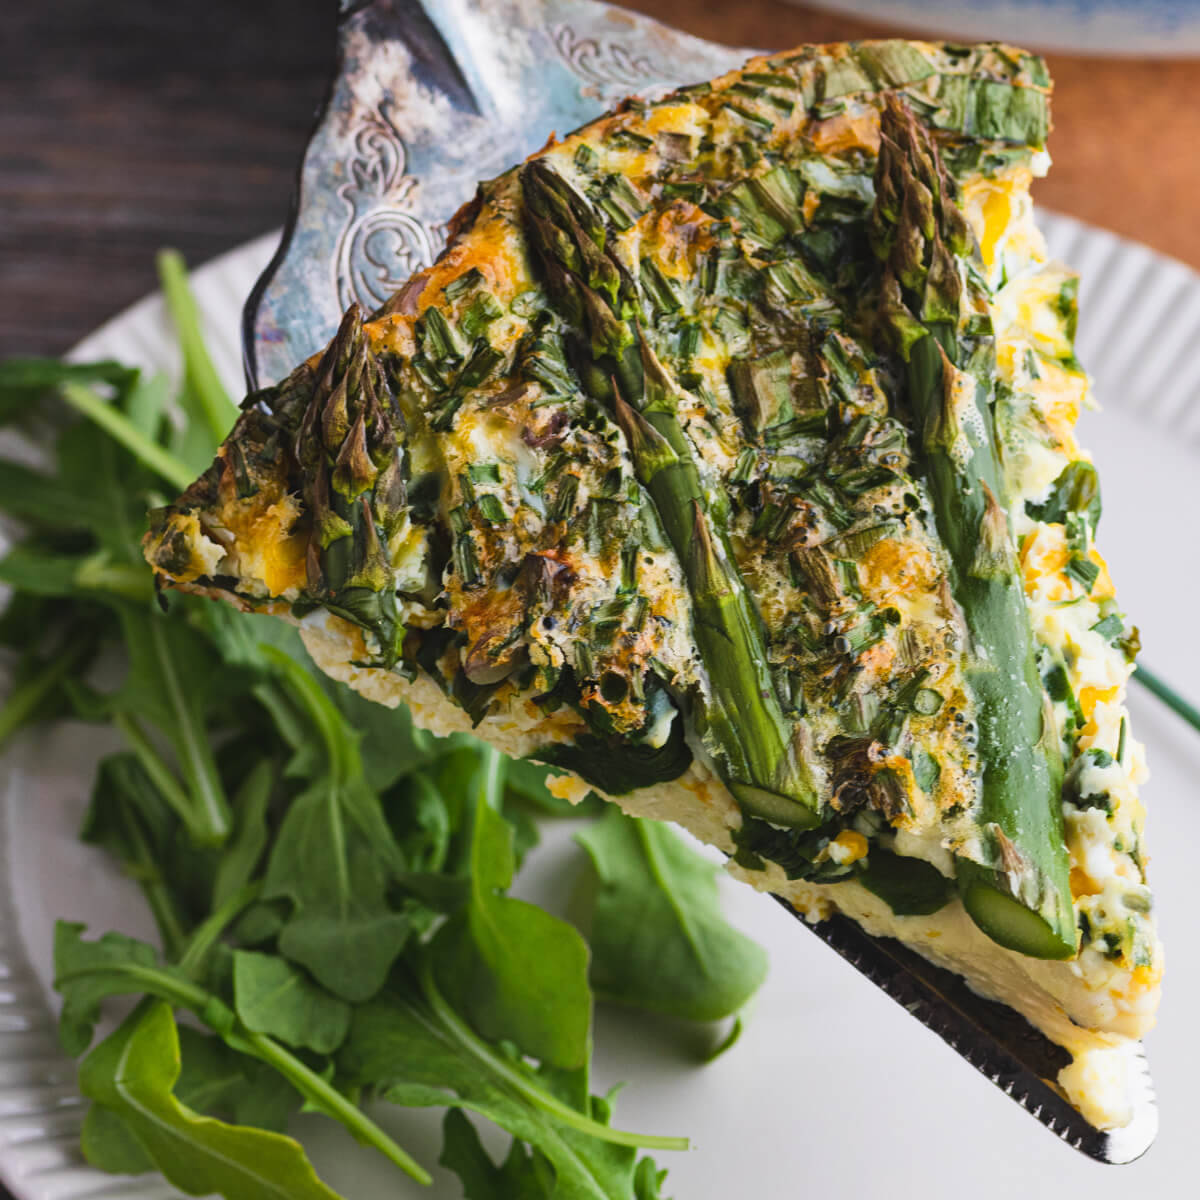 A silver pie server under a slice of Asparagus quiche with wild ramps on a white plate.